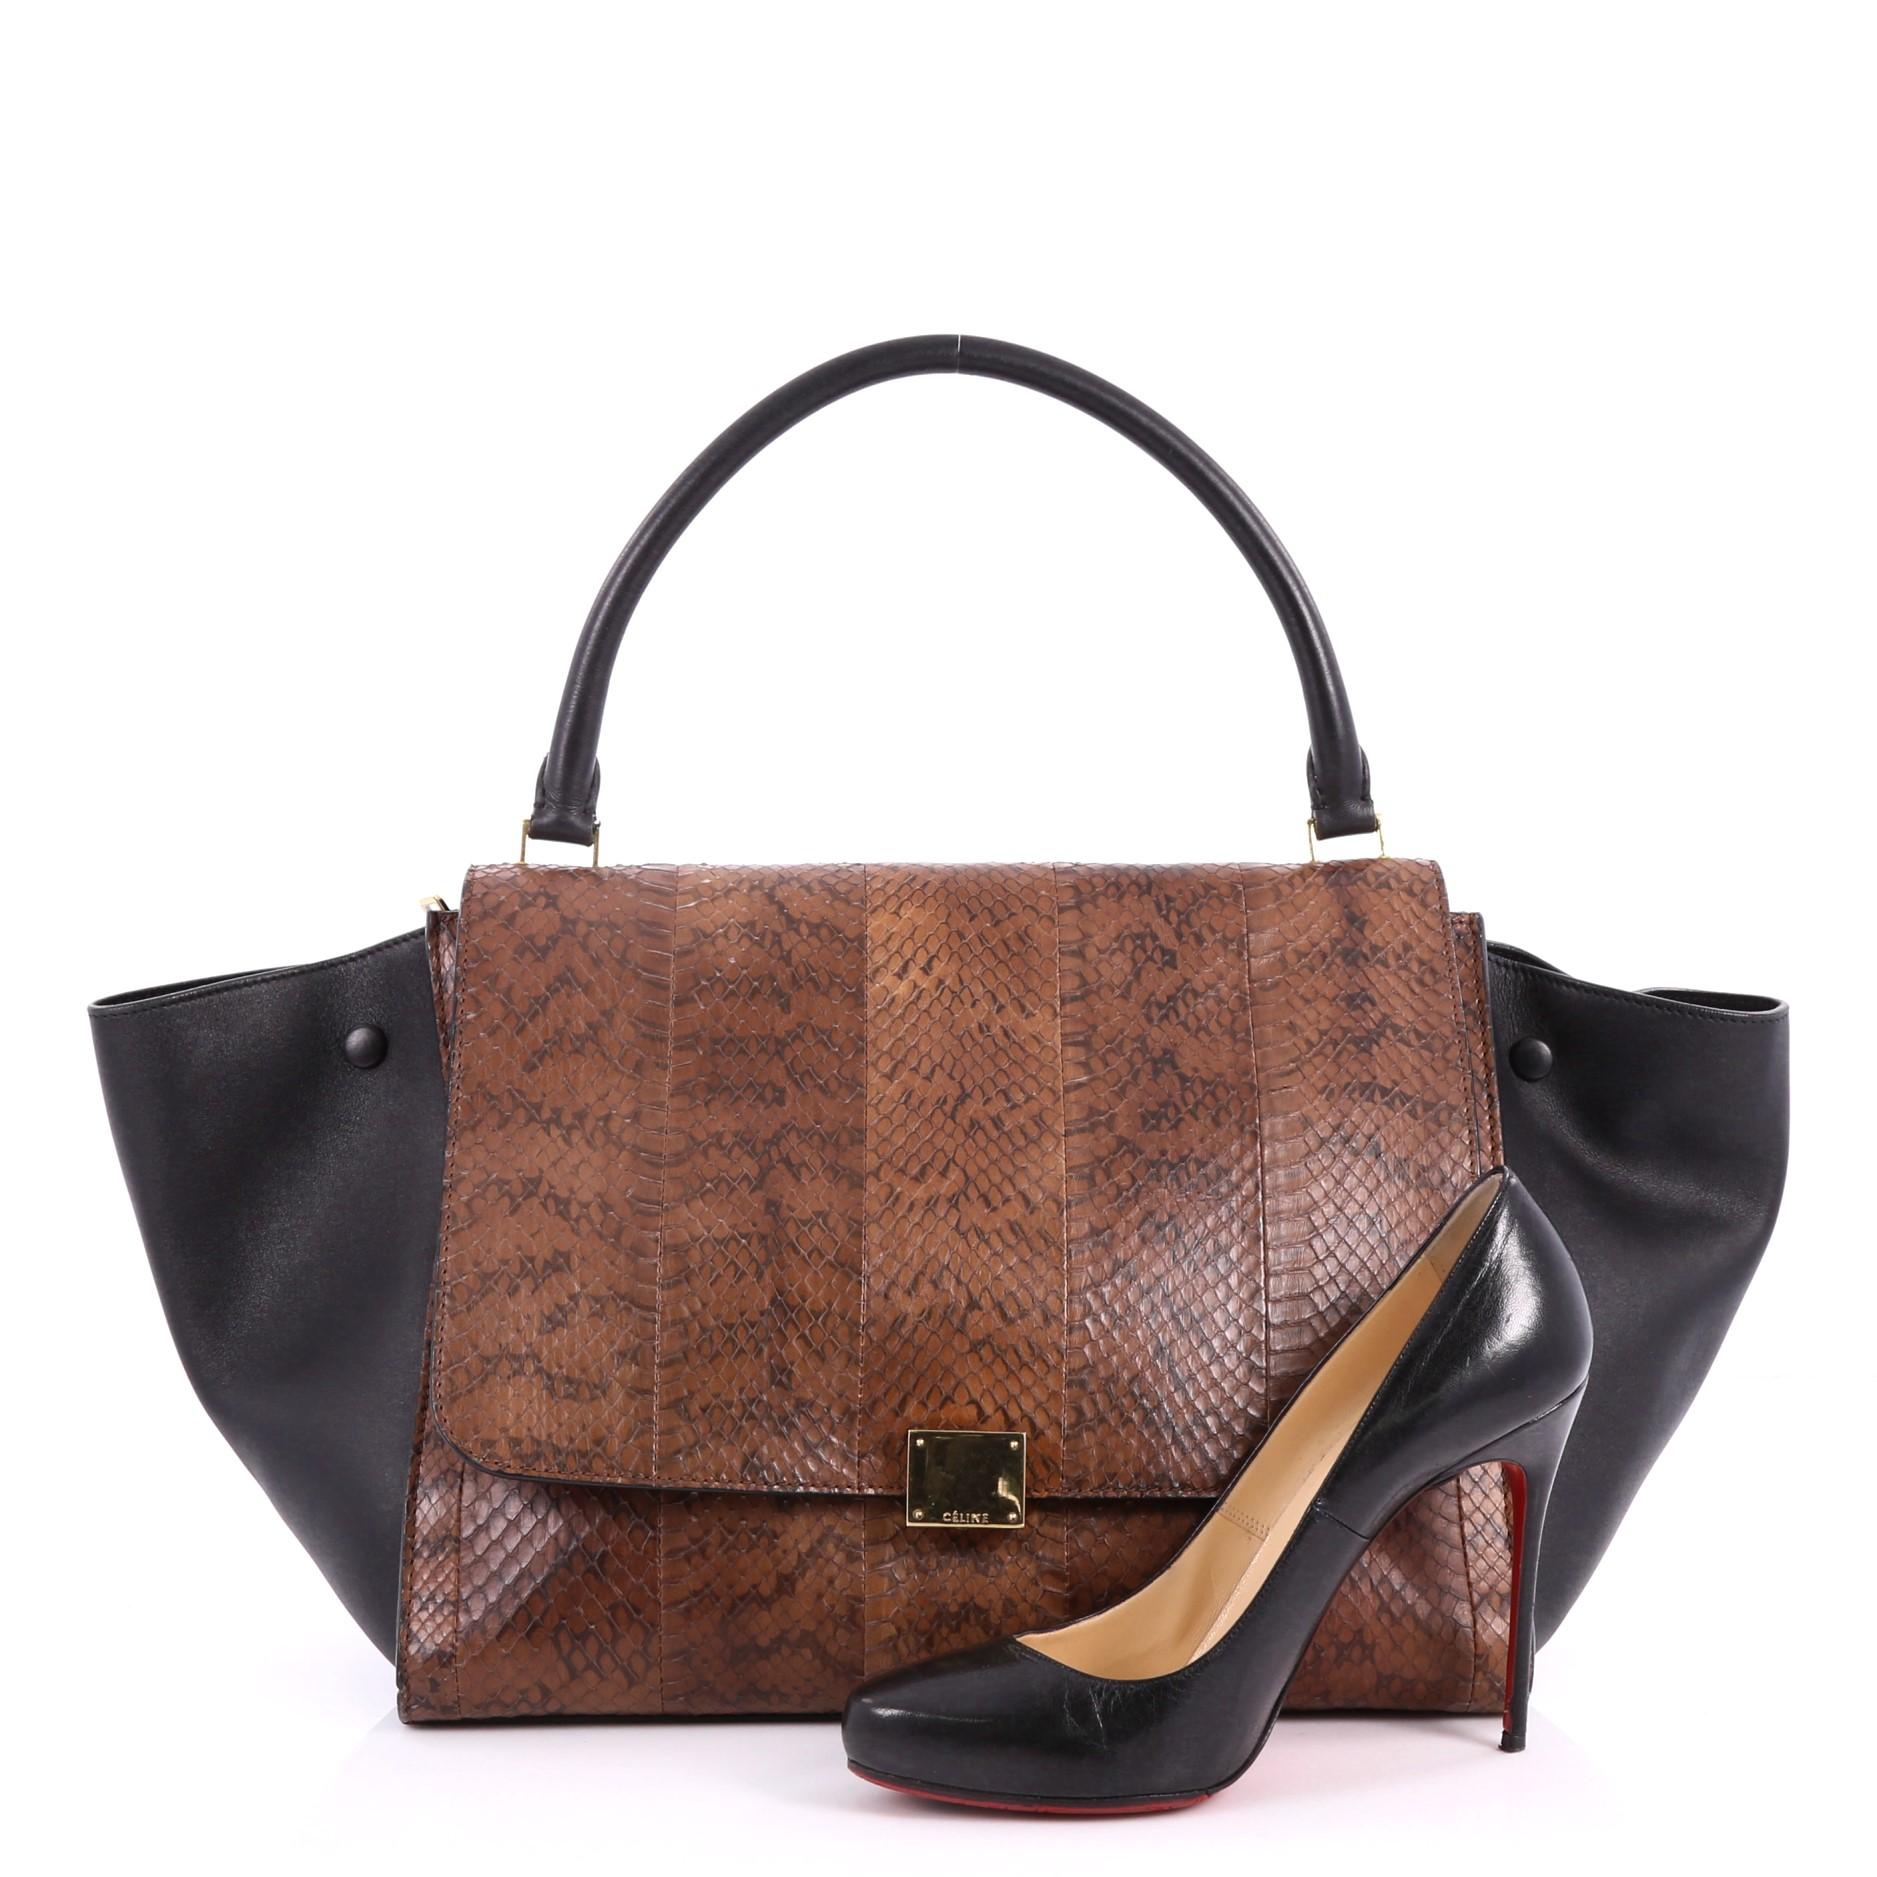 This authentic Celine Trapeze Handbag Python Large is a fashionista's dream. Crafted in genuine brown python skin with black leather wings, this stylish bag features exterior back zip pocket, top handle and gold-tone hardware accents. Its square